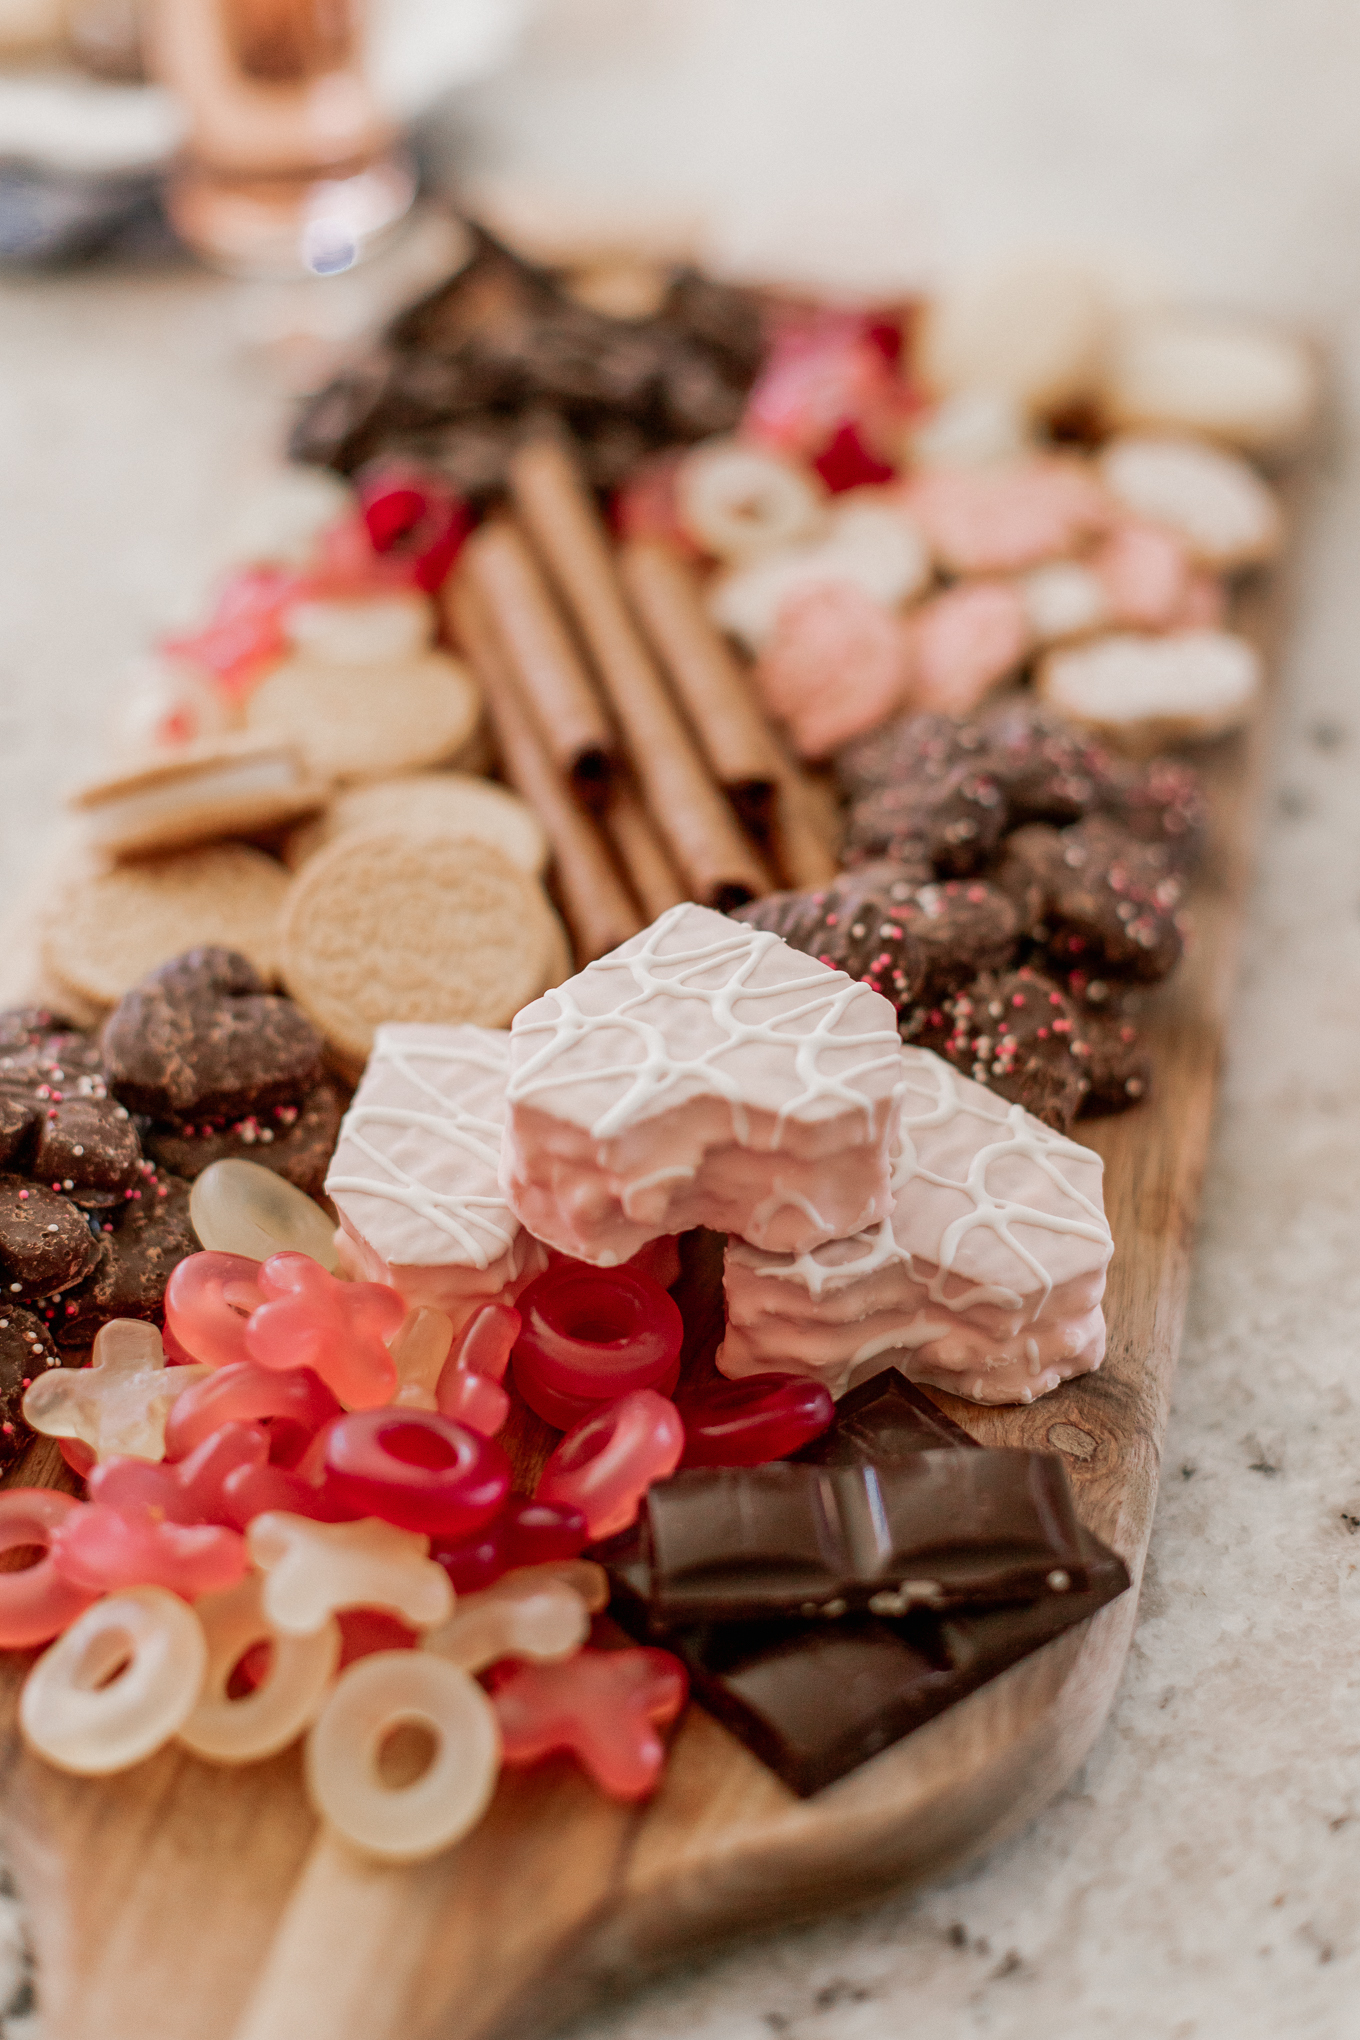 Valentine's Day Dessert Charcuterie Board | How to Entertain for Galentine's Day | Louella Reese